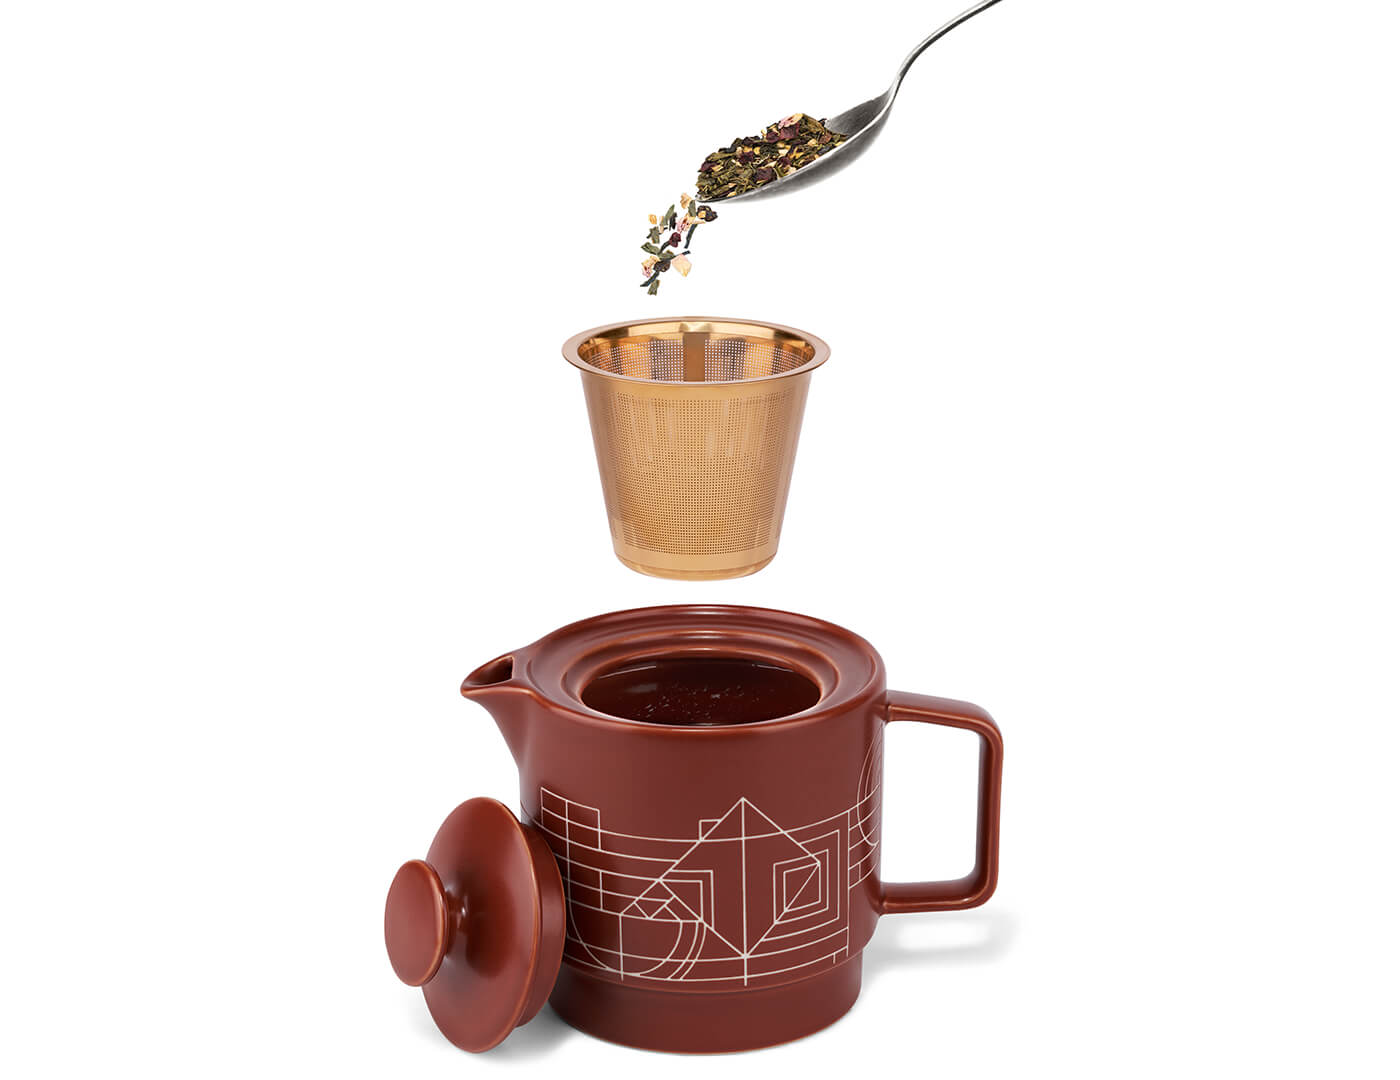 Steeping loose tea in the Terra stoneware teapot and infuser